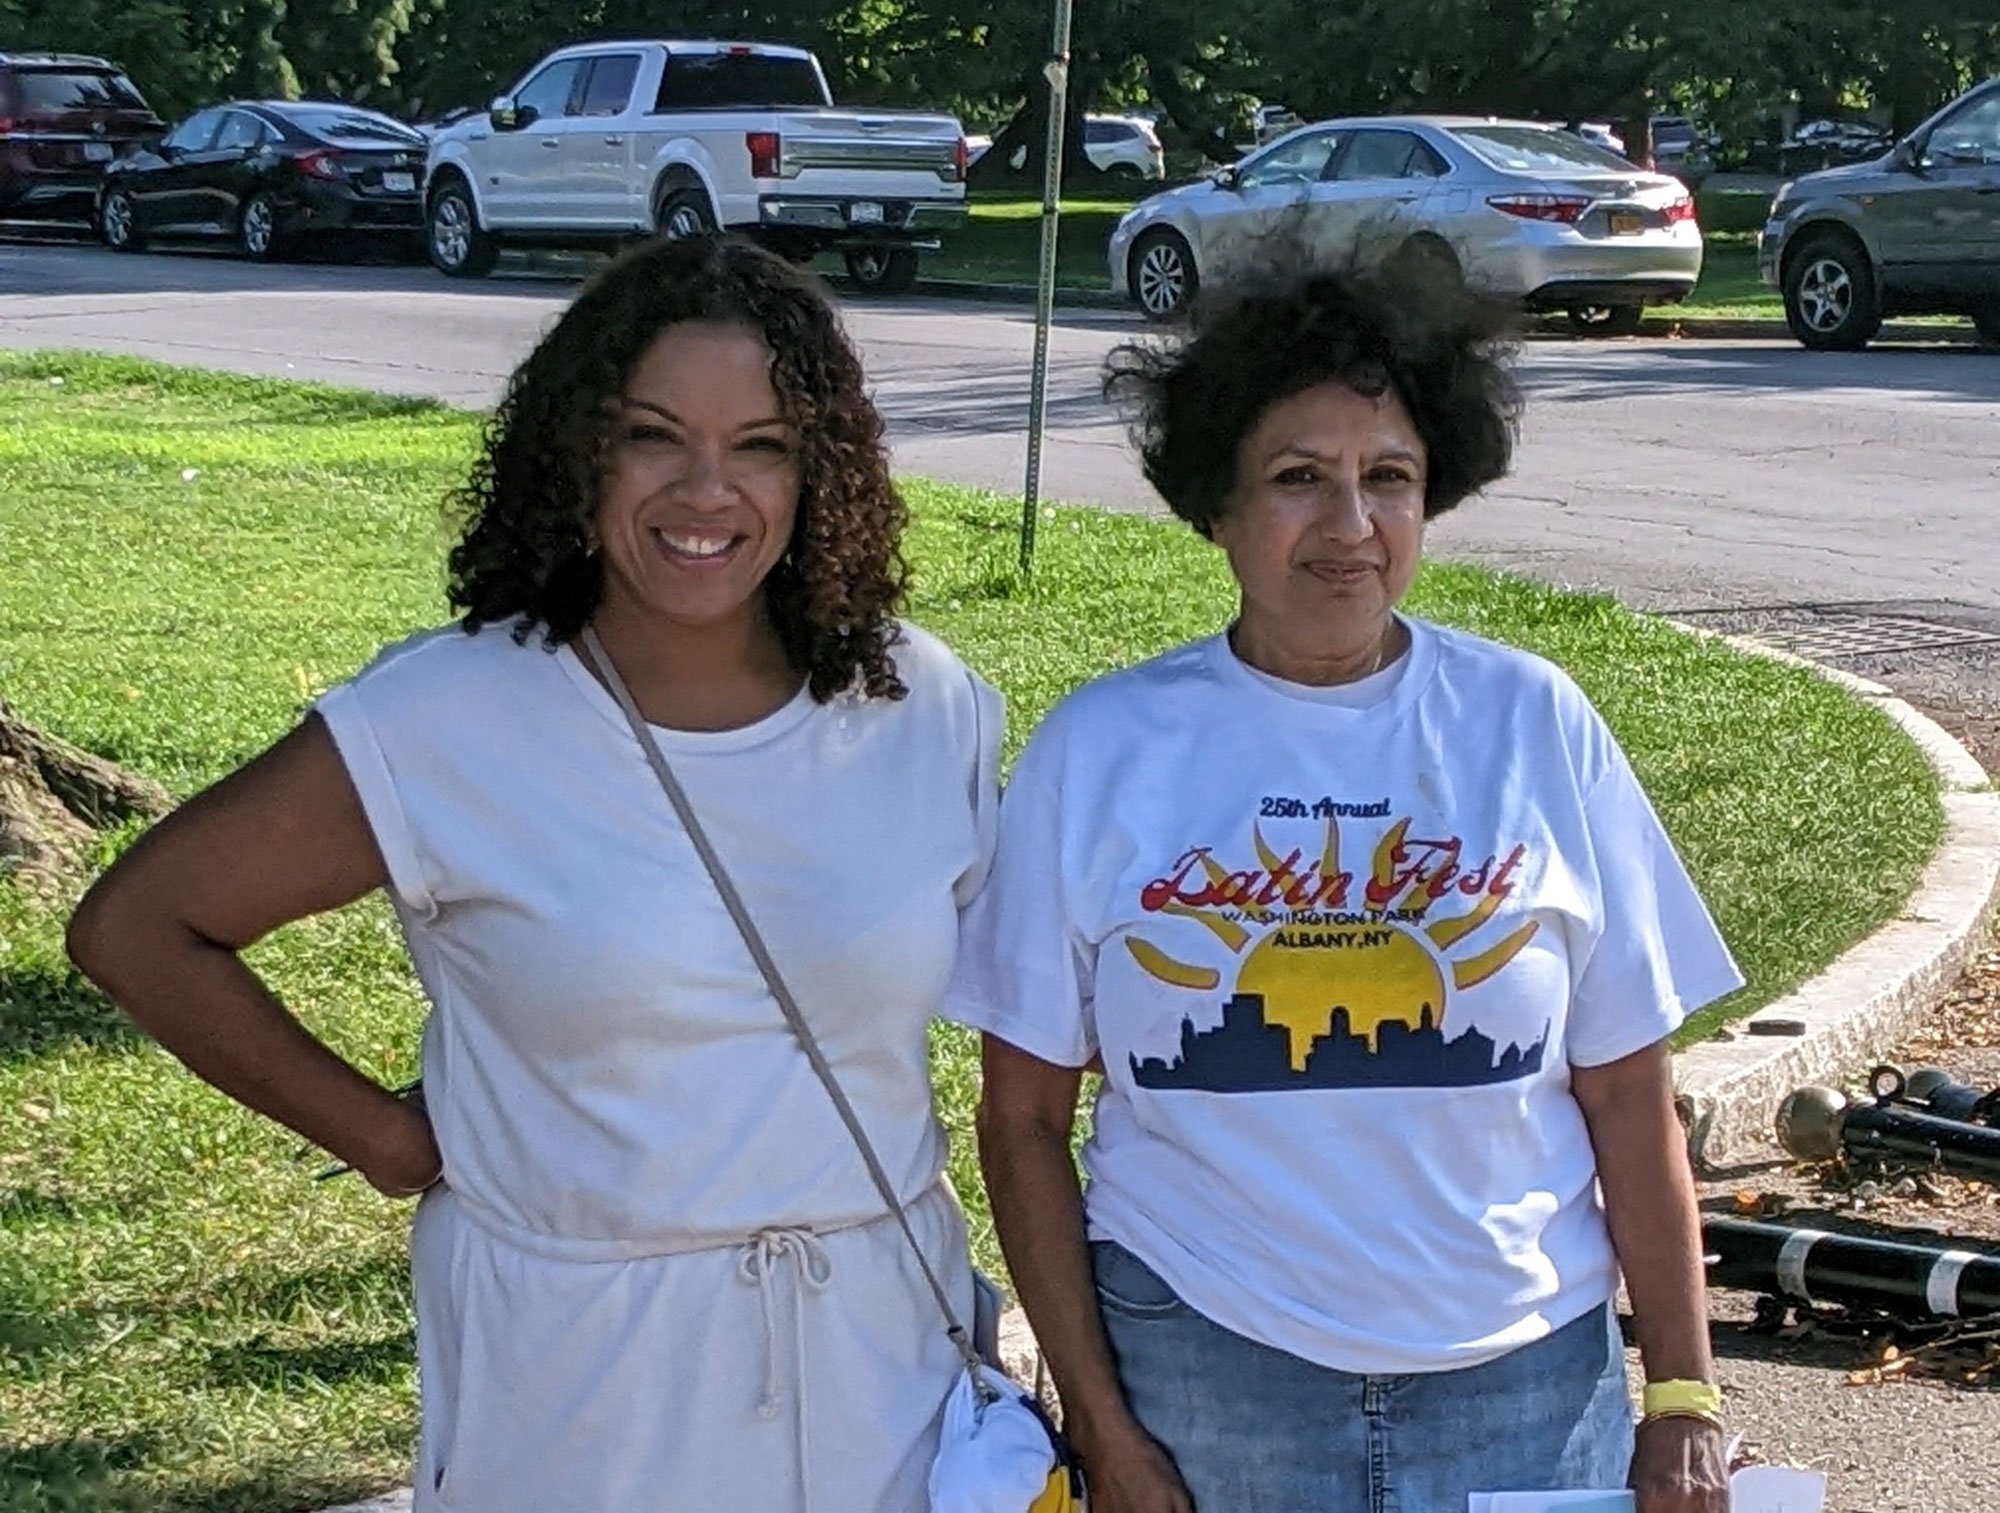 Two women, one wearing a 2022 LatinFest t-shirt, pose for a photo.